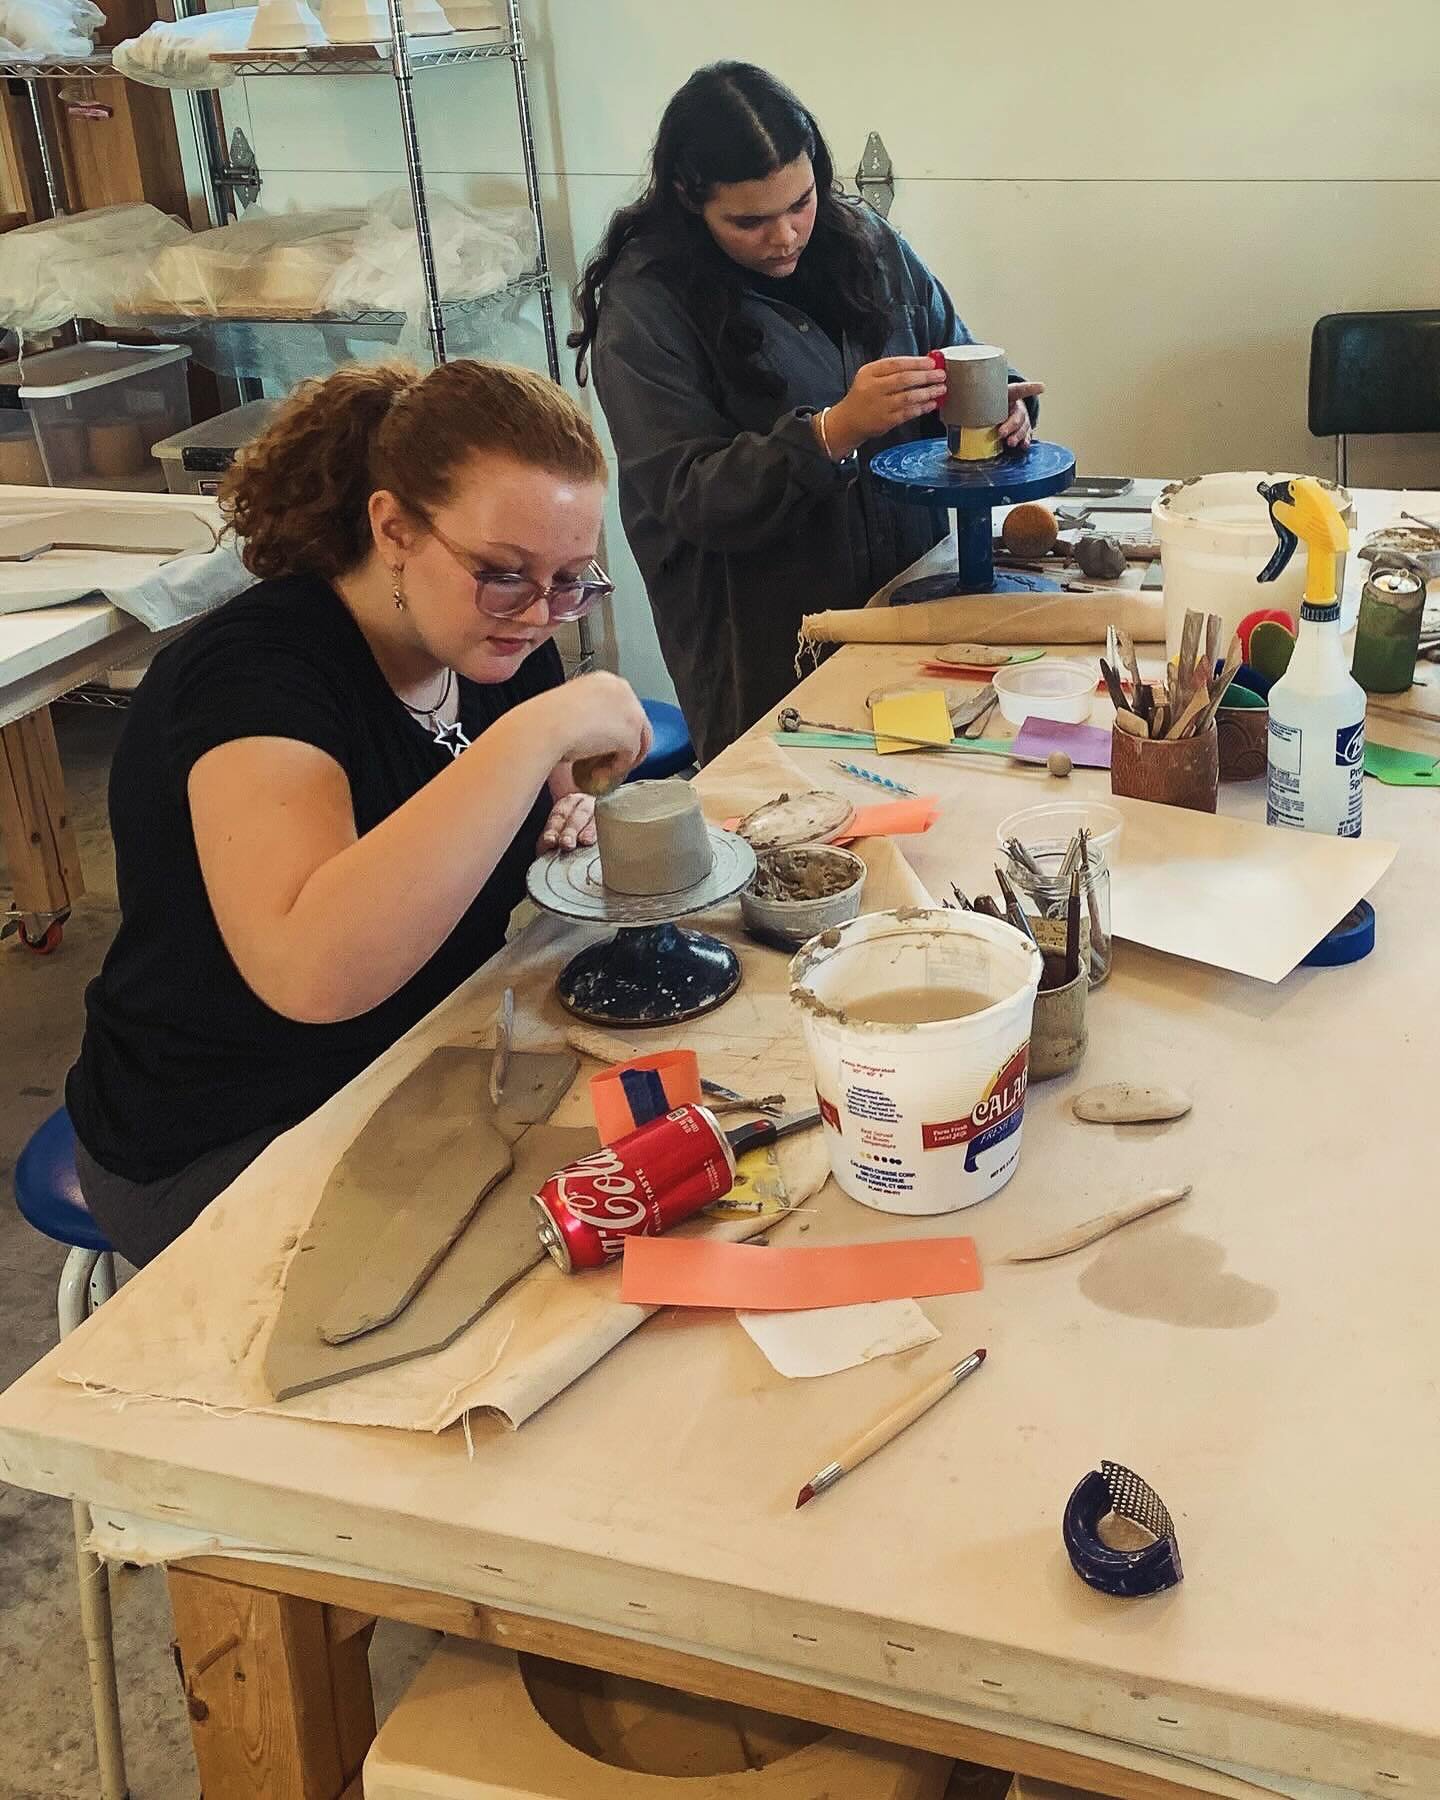 Last week we wrapped up our Mentor Program, which provides high school students from Deer Isle and across the Blue Hill Peninsula with the opportunity to learn from professional artists and makers in their community. Taking place each winter for the 